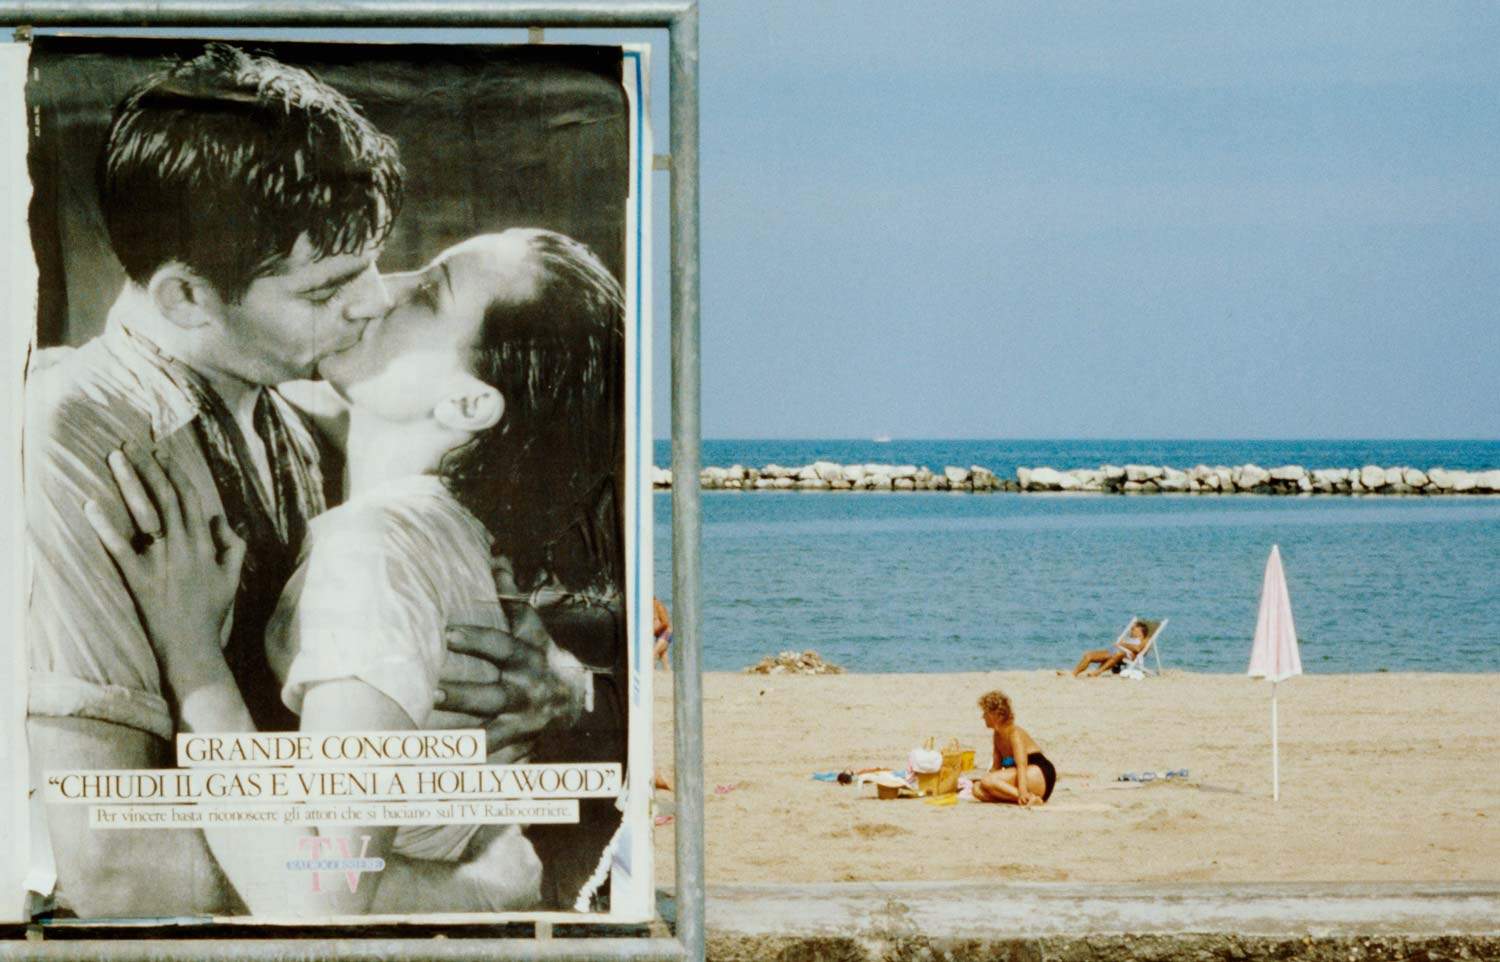 A film on Luigi Ghirri, with the voice of Stefano Accorsi, for the 30th anniversary of his death